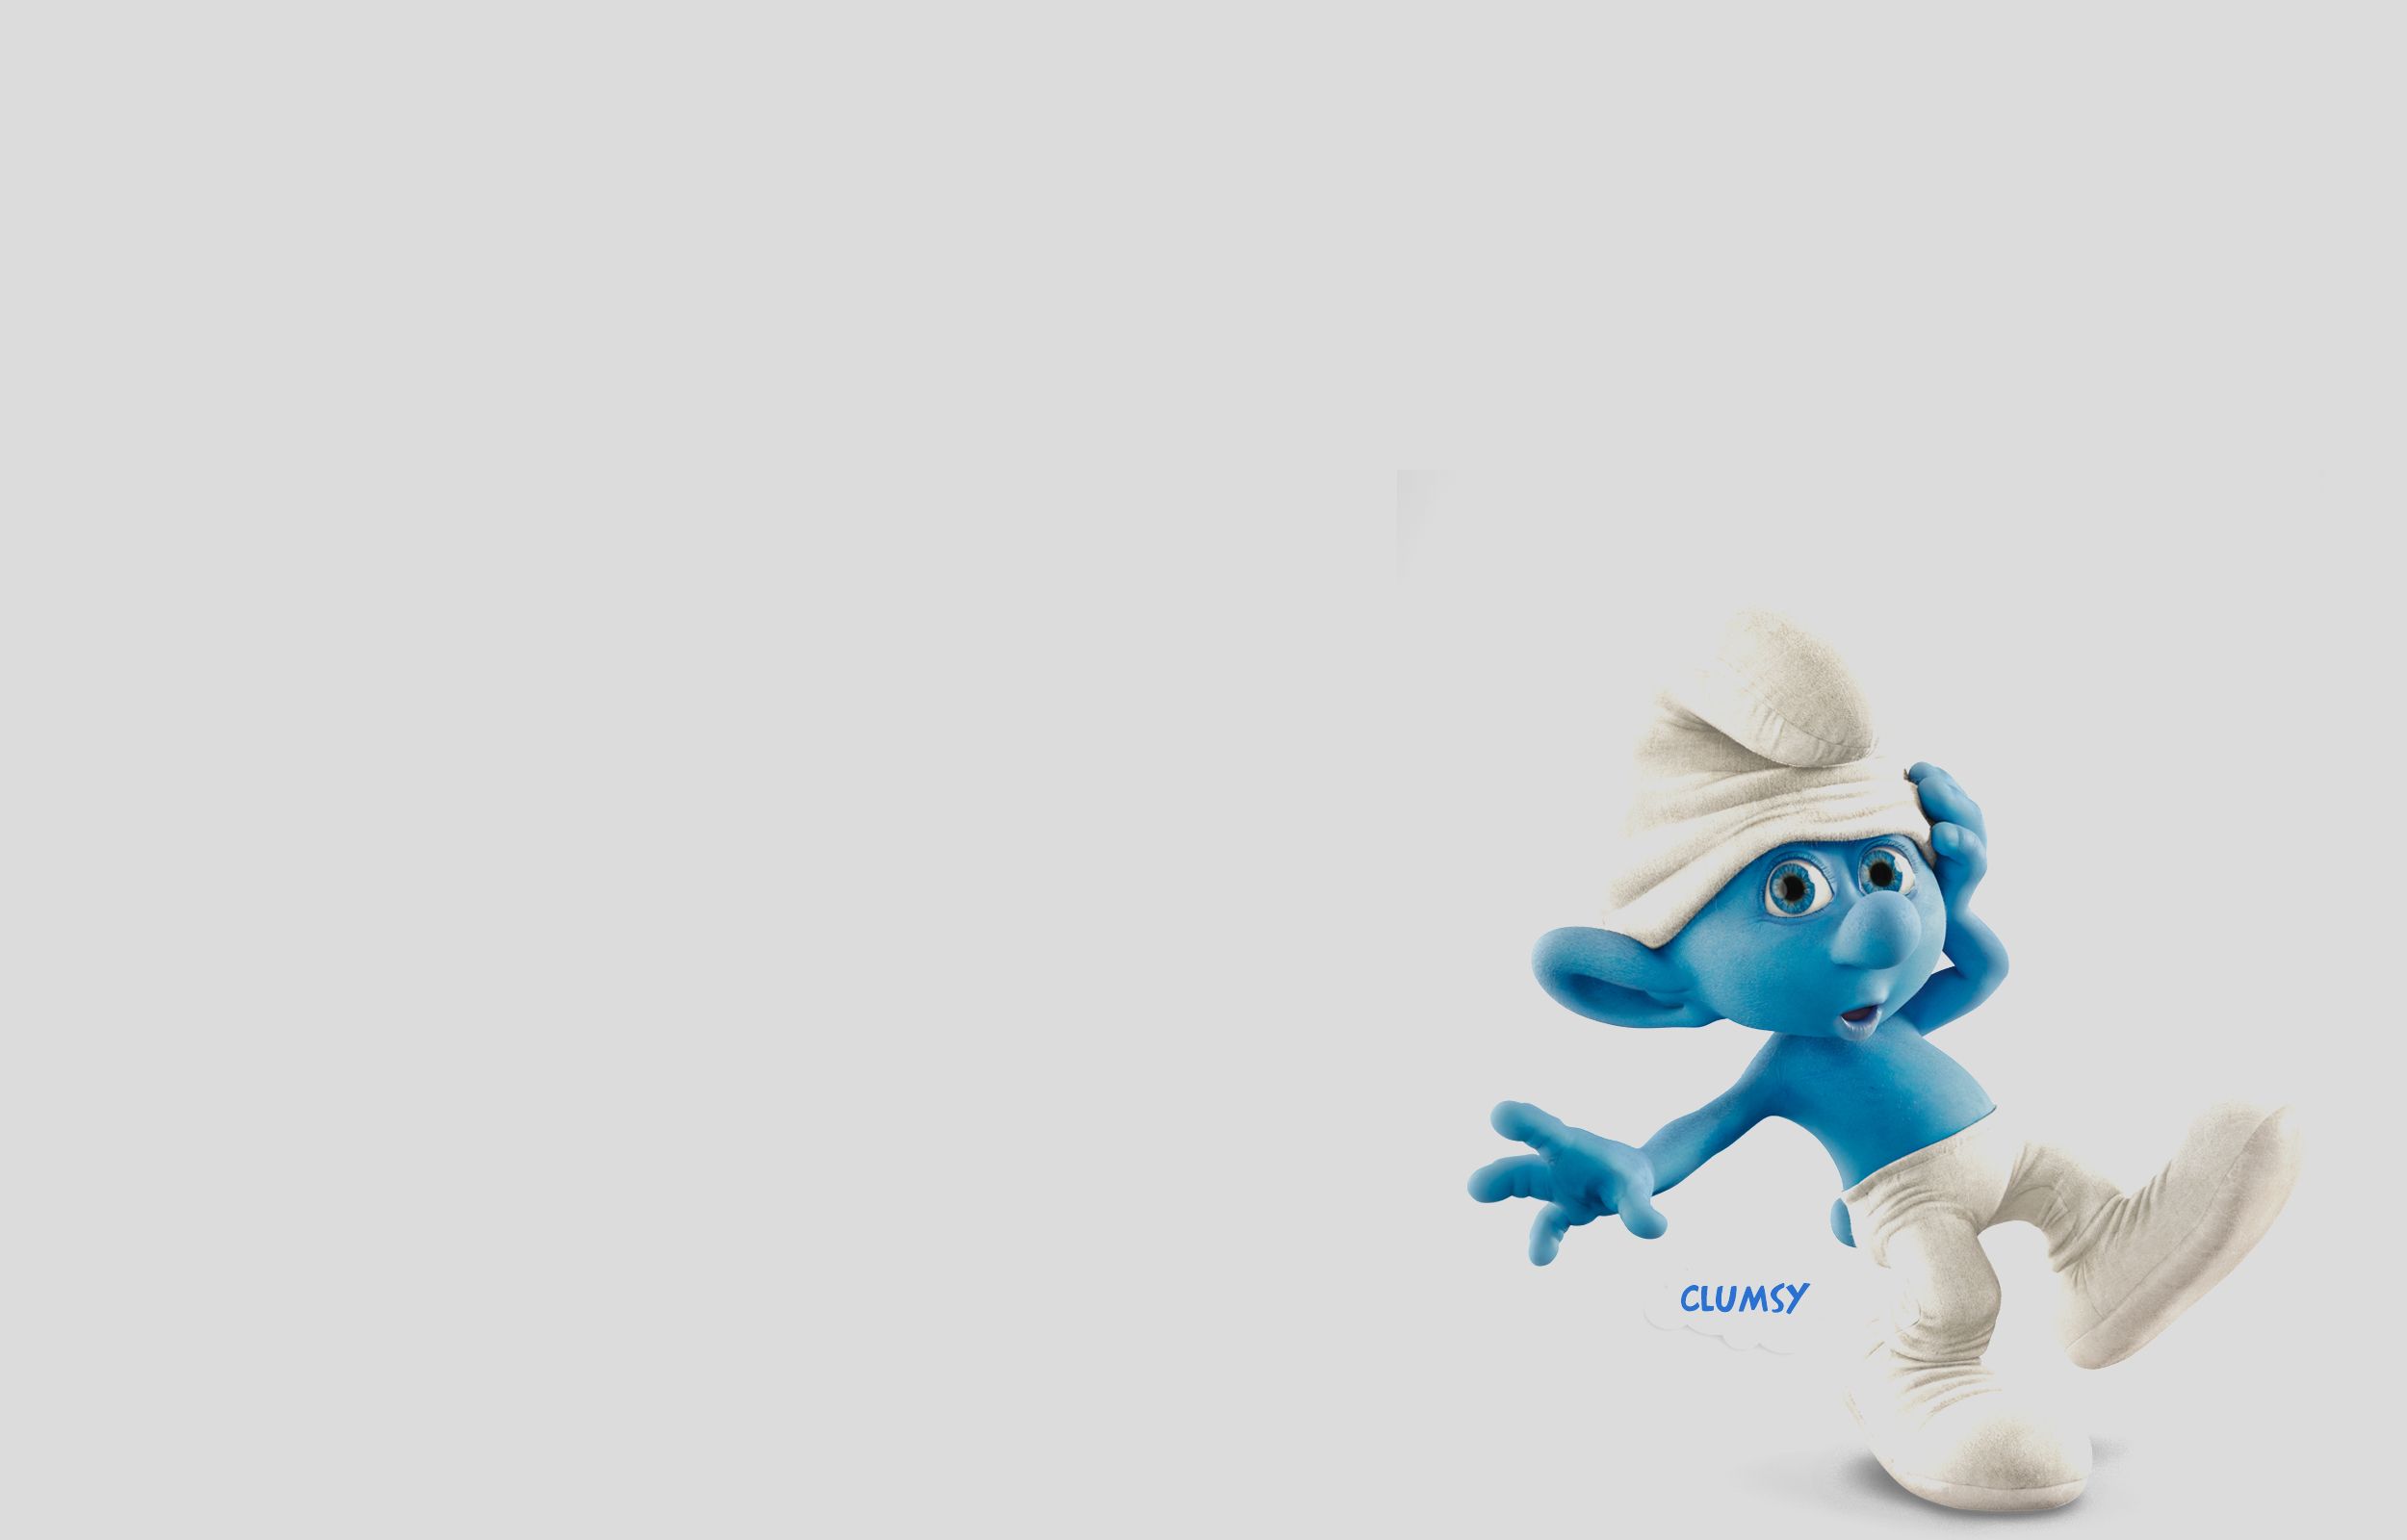 5236_Character-from-Smurfs-movie-Little-clumsy.jpg